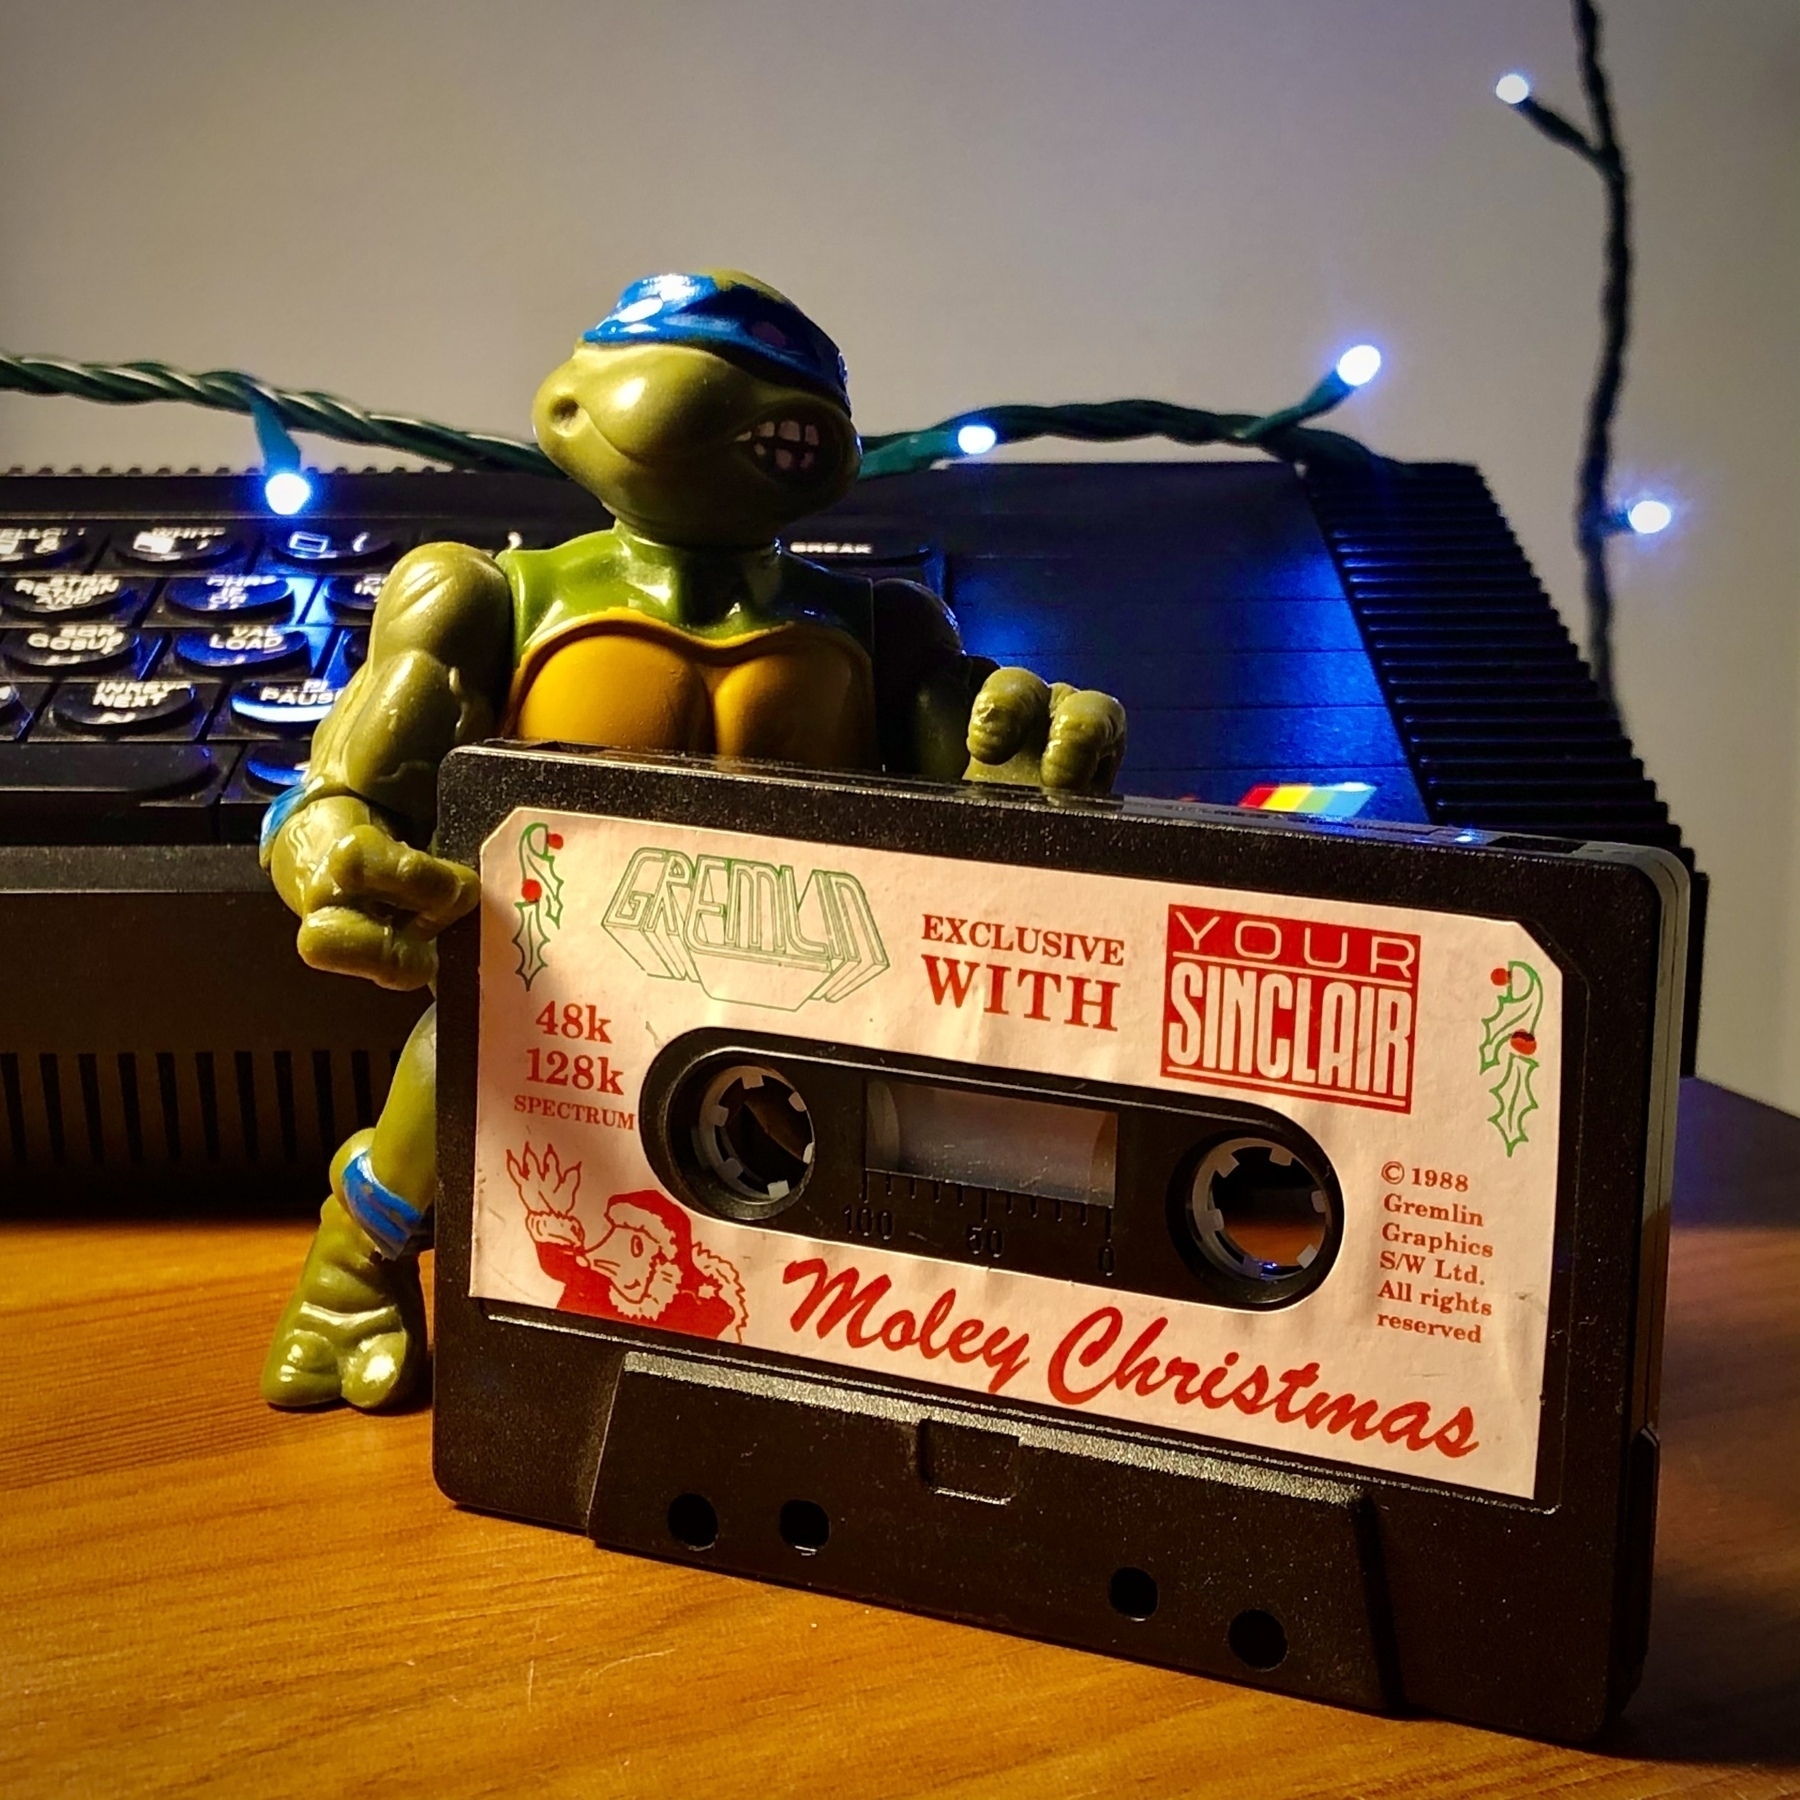 “Moley Christmas” game for ZX Spectrum on cassette tape being held by Leonardo (Teenage Mutant Ninja Turtles) action figure, standing in front of a ZX Spectrum. Fairy lights in the background.